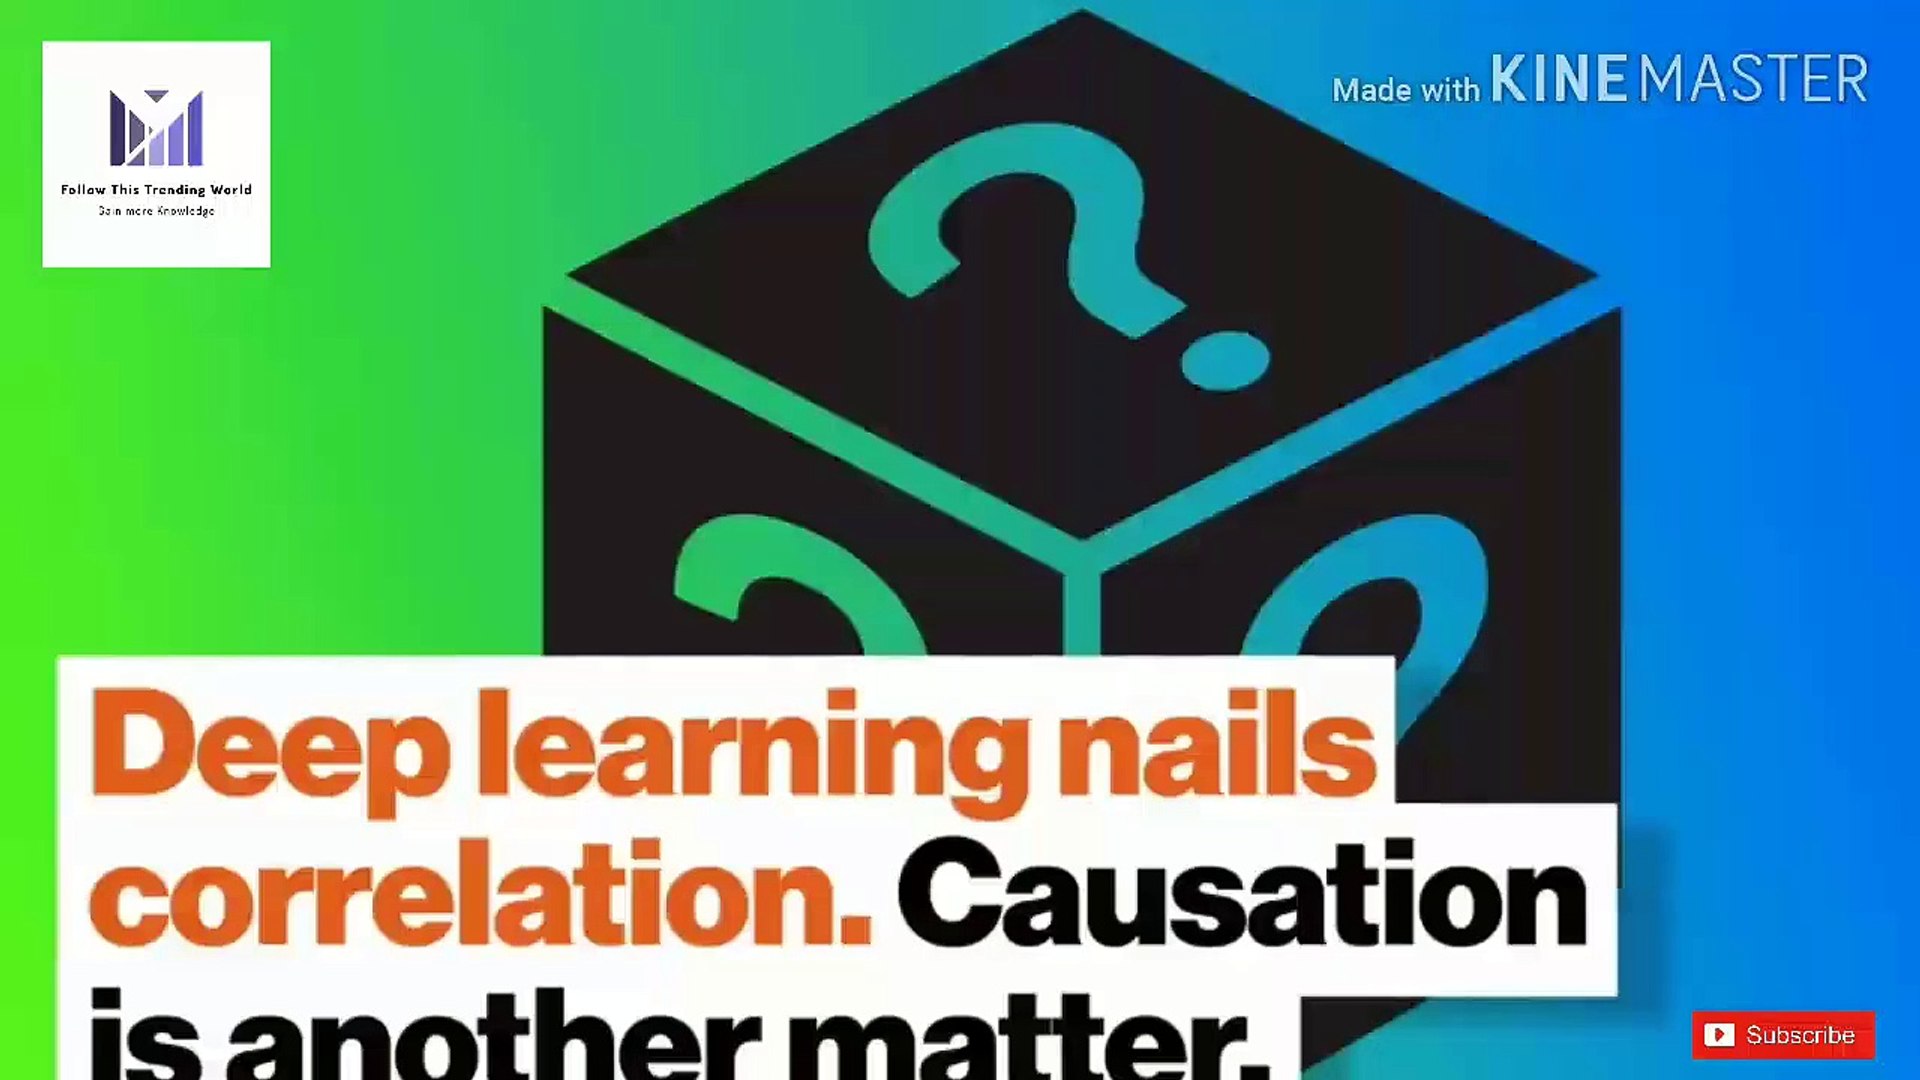 Deep learning nails correlation. Causation is another matter.